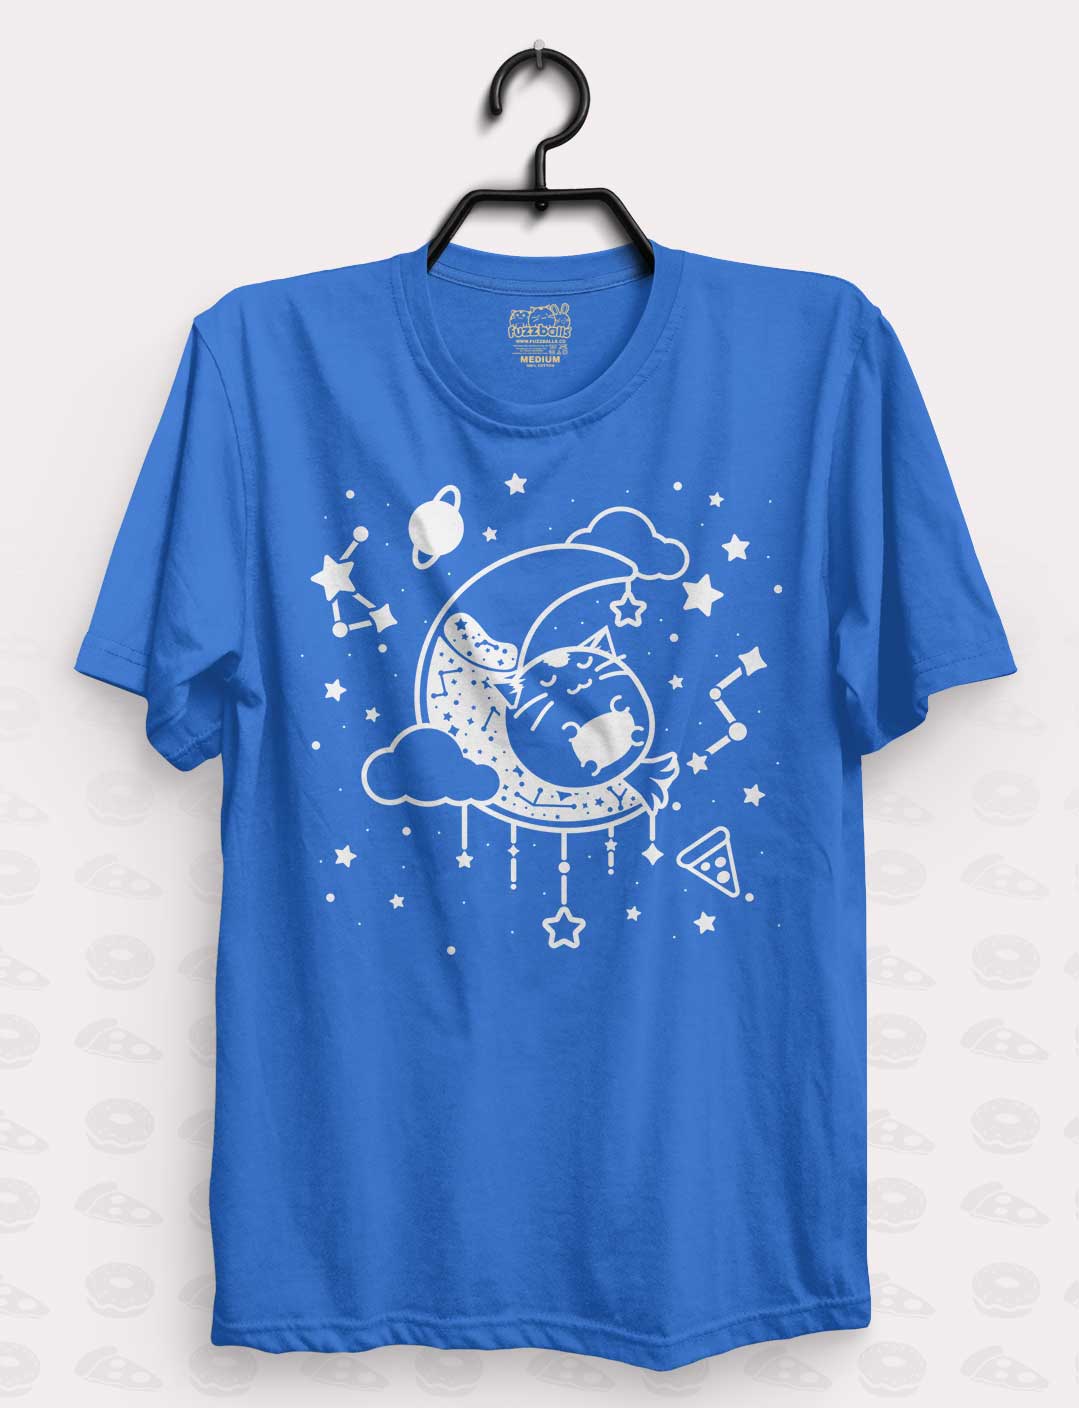 Cat in the moon Shirt